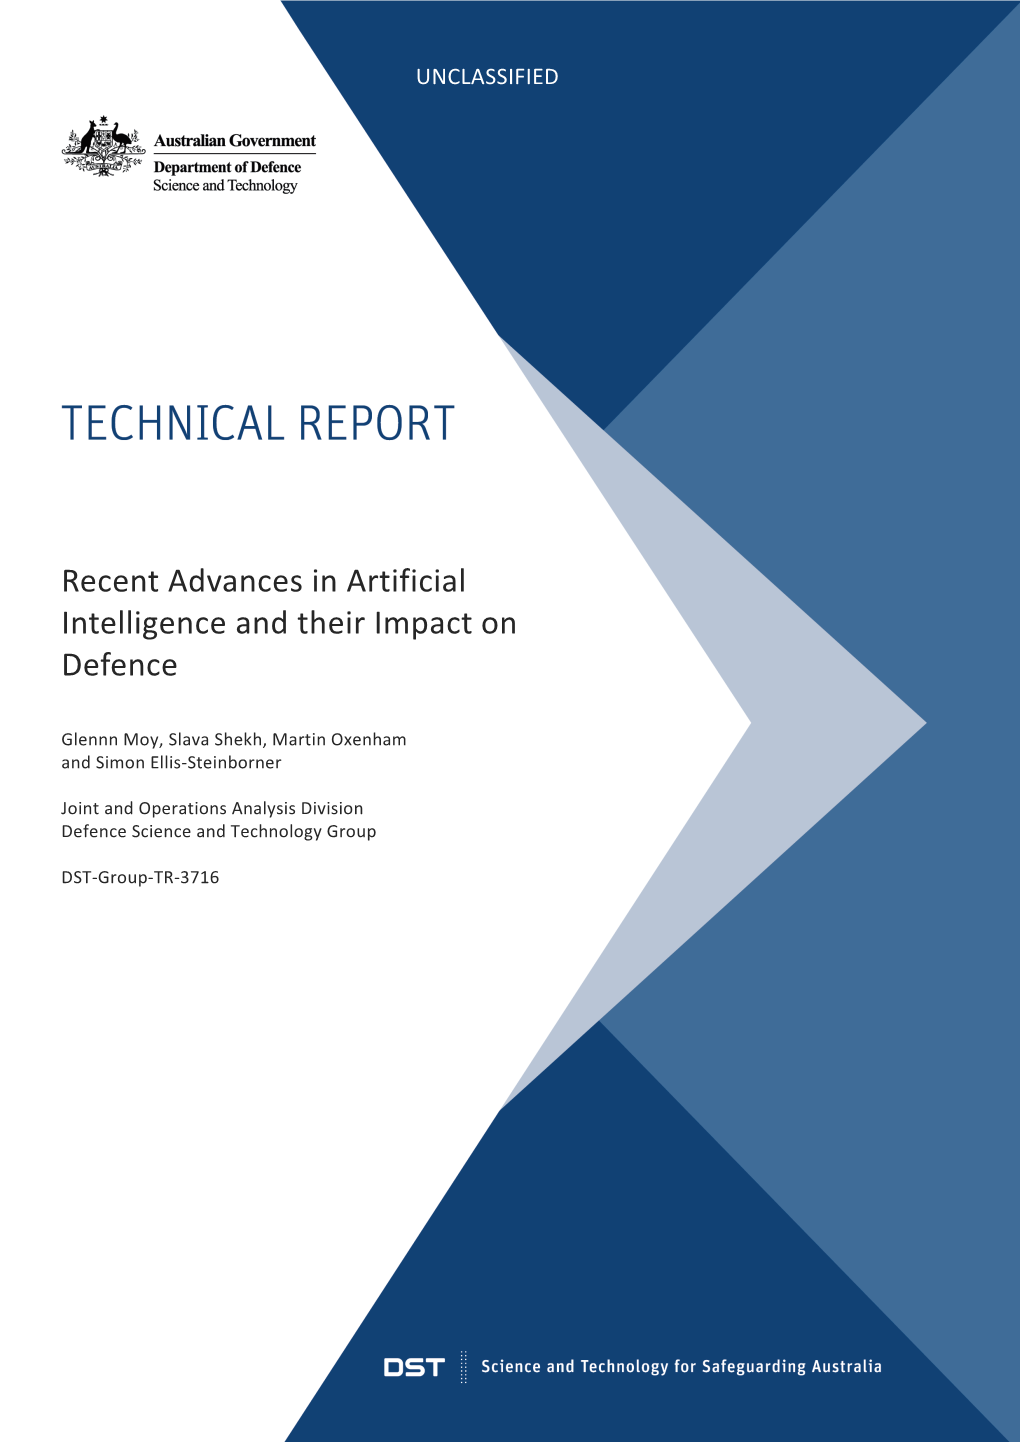 Recent Advances in Artificial Intelligence and Their Impact on Defence